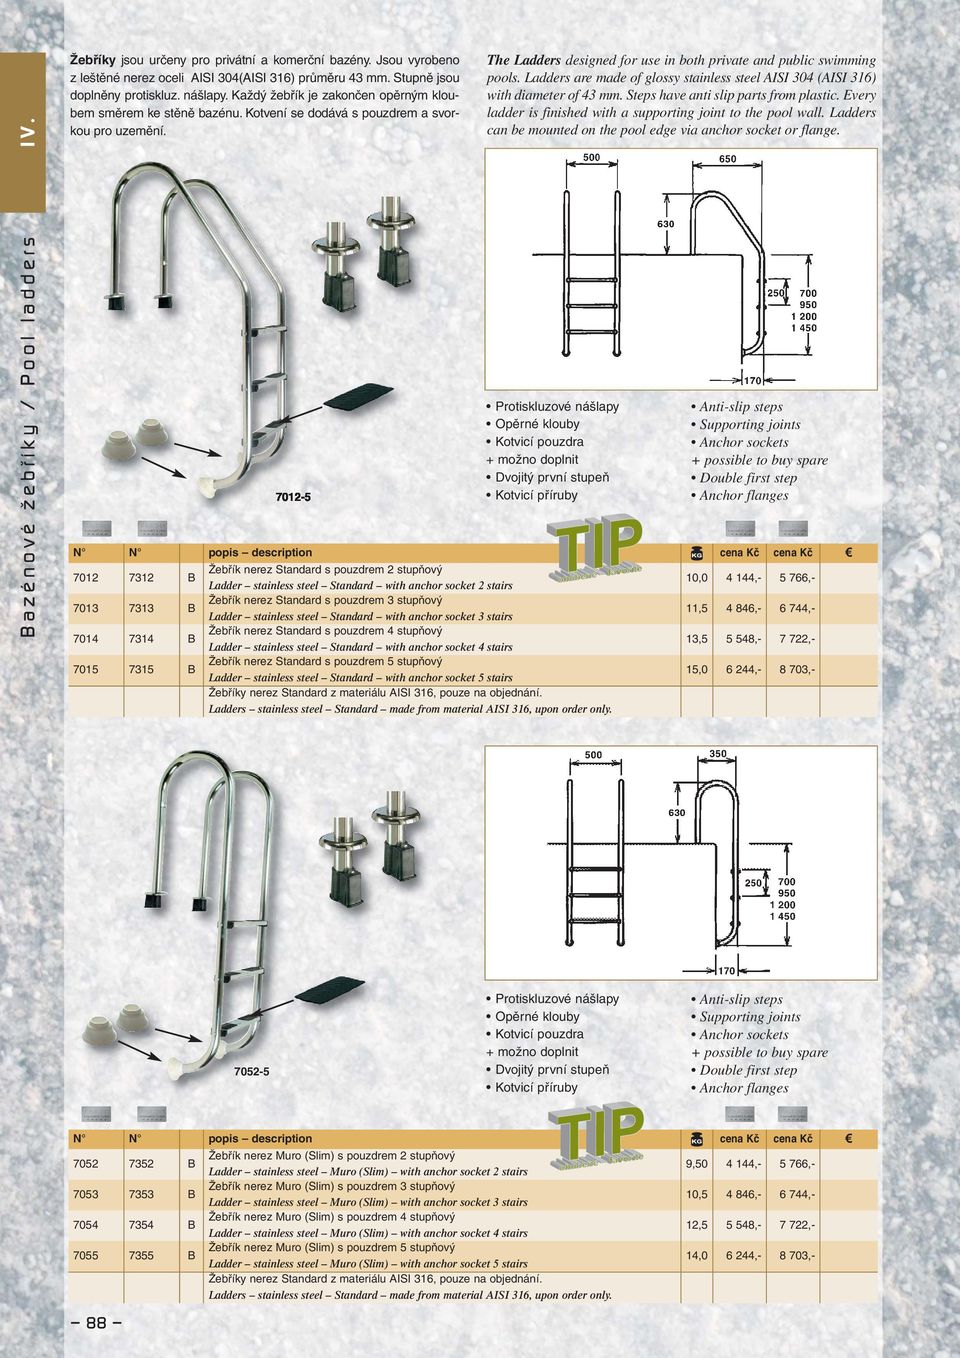 Ladders are made of glossy stainless steel AISI 304 (AISI 316) with diameter of 43 mm. Steps have anti slip parts from plastic. Every ladder is finished with a supporting joint to the pool wall.